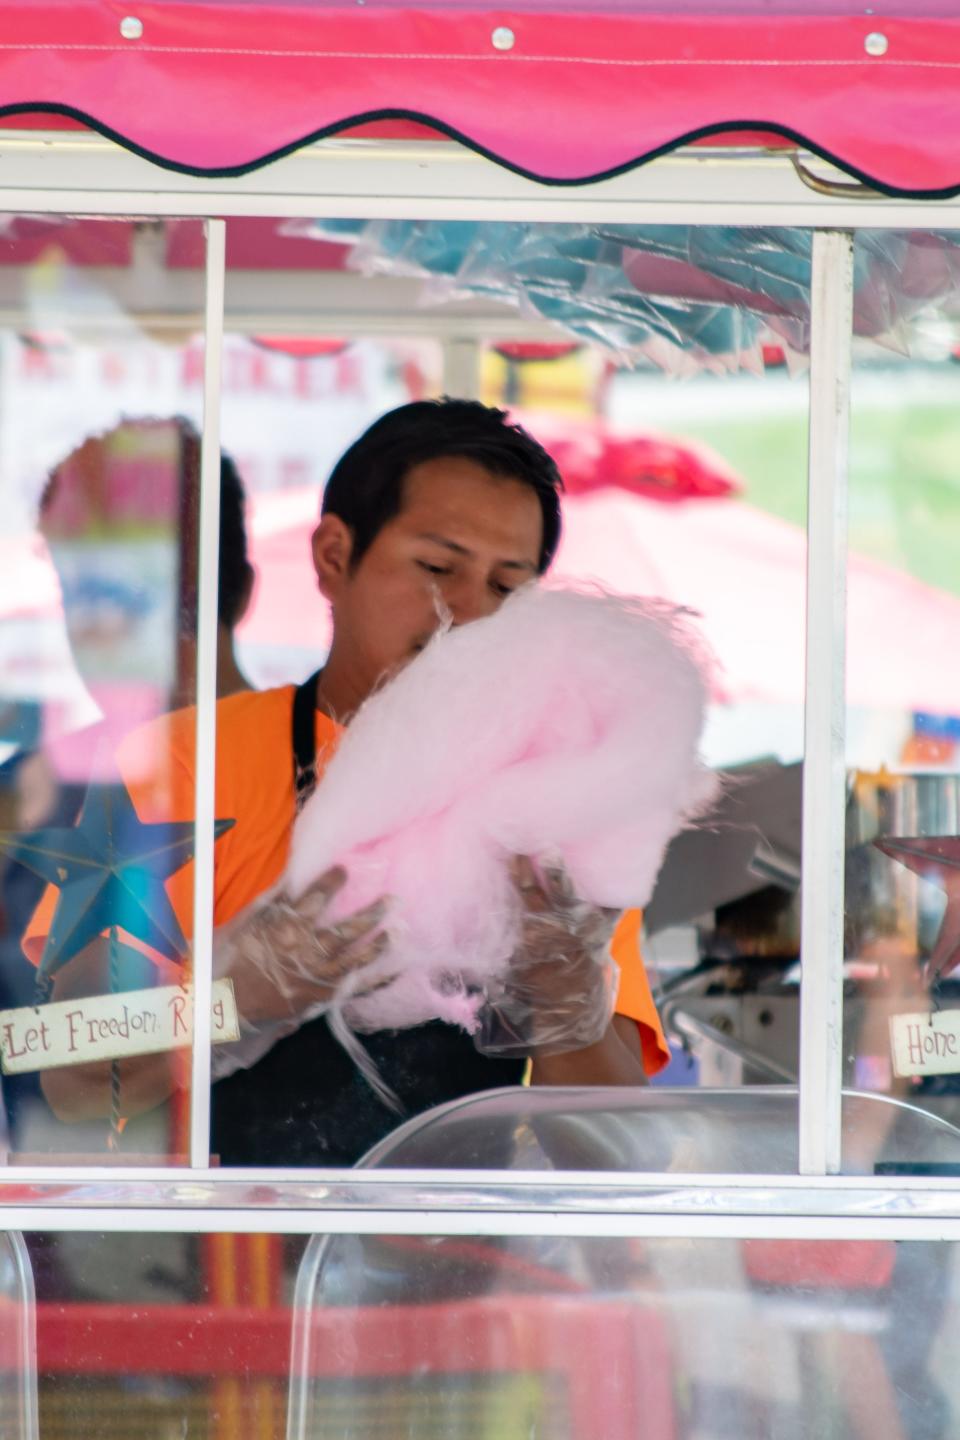 Cotton candy being made at the Guernsey County Fair.